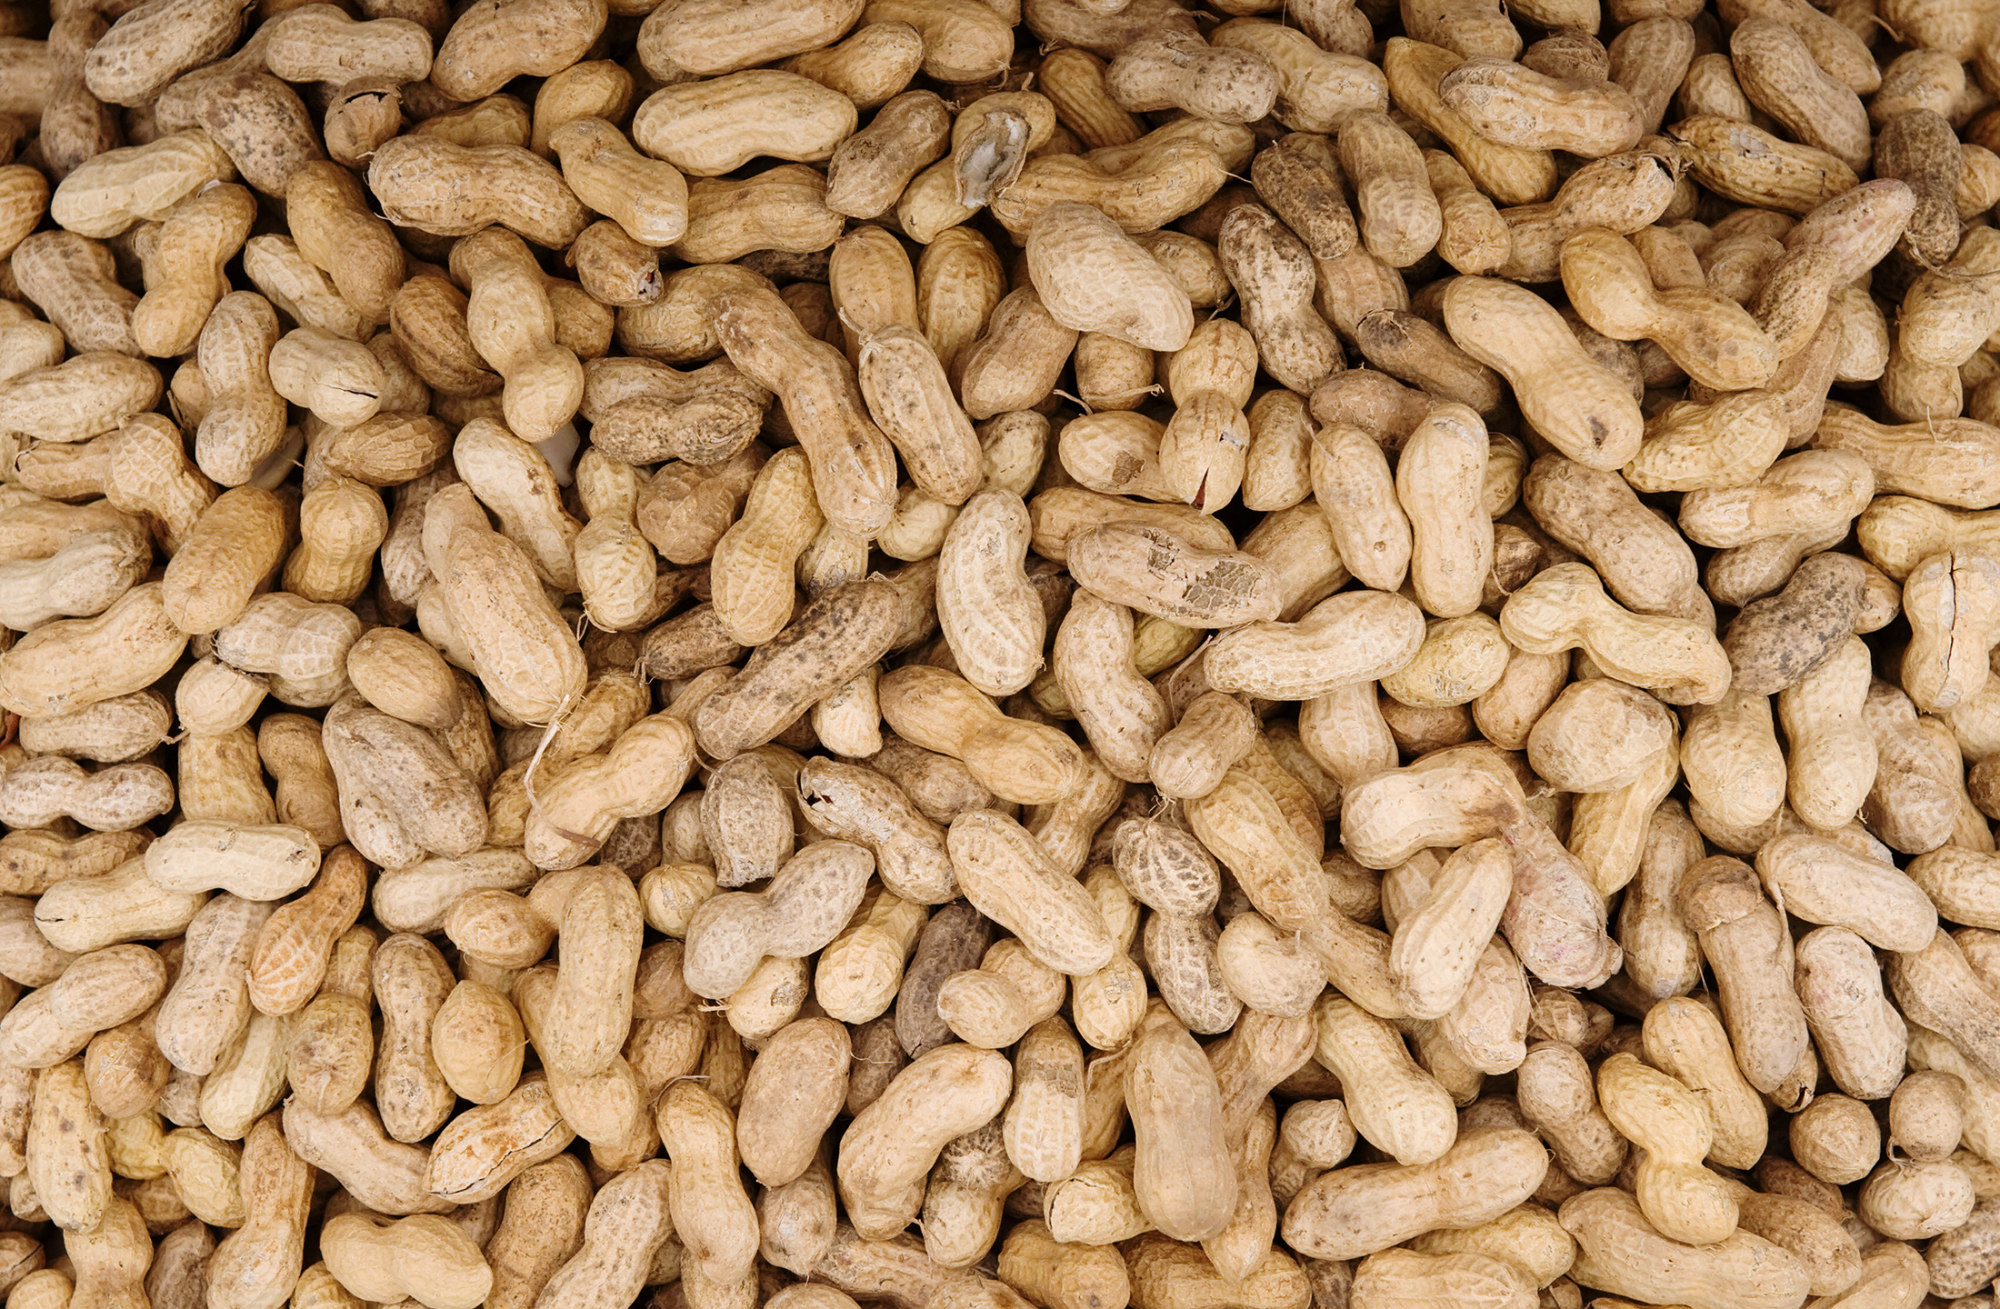 Peanuts are offered for sale at Eastern Market on Capitol Hill in Washington, DC, on June 27, 2008.
